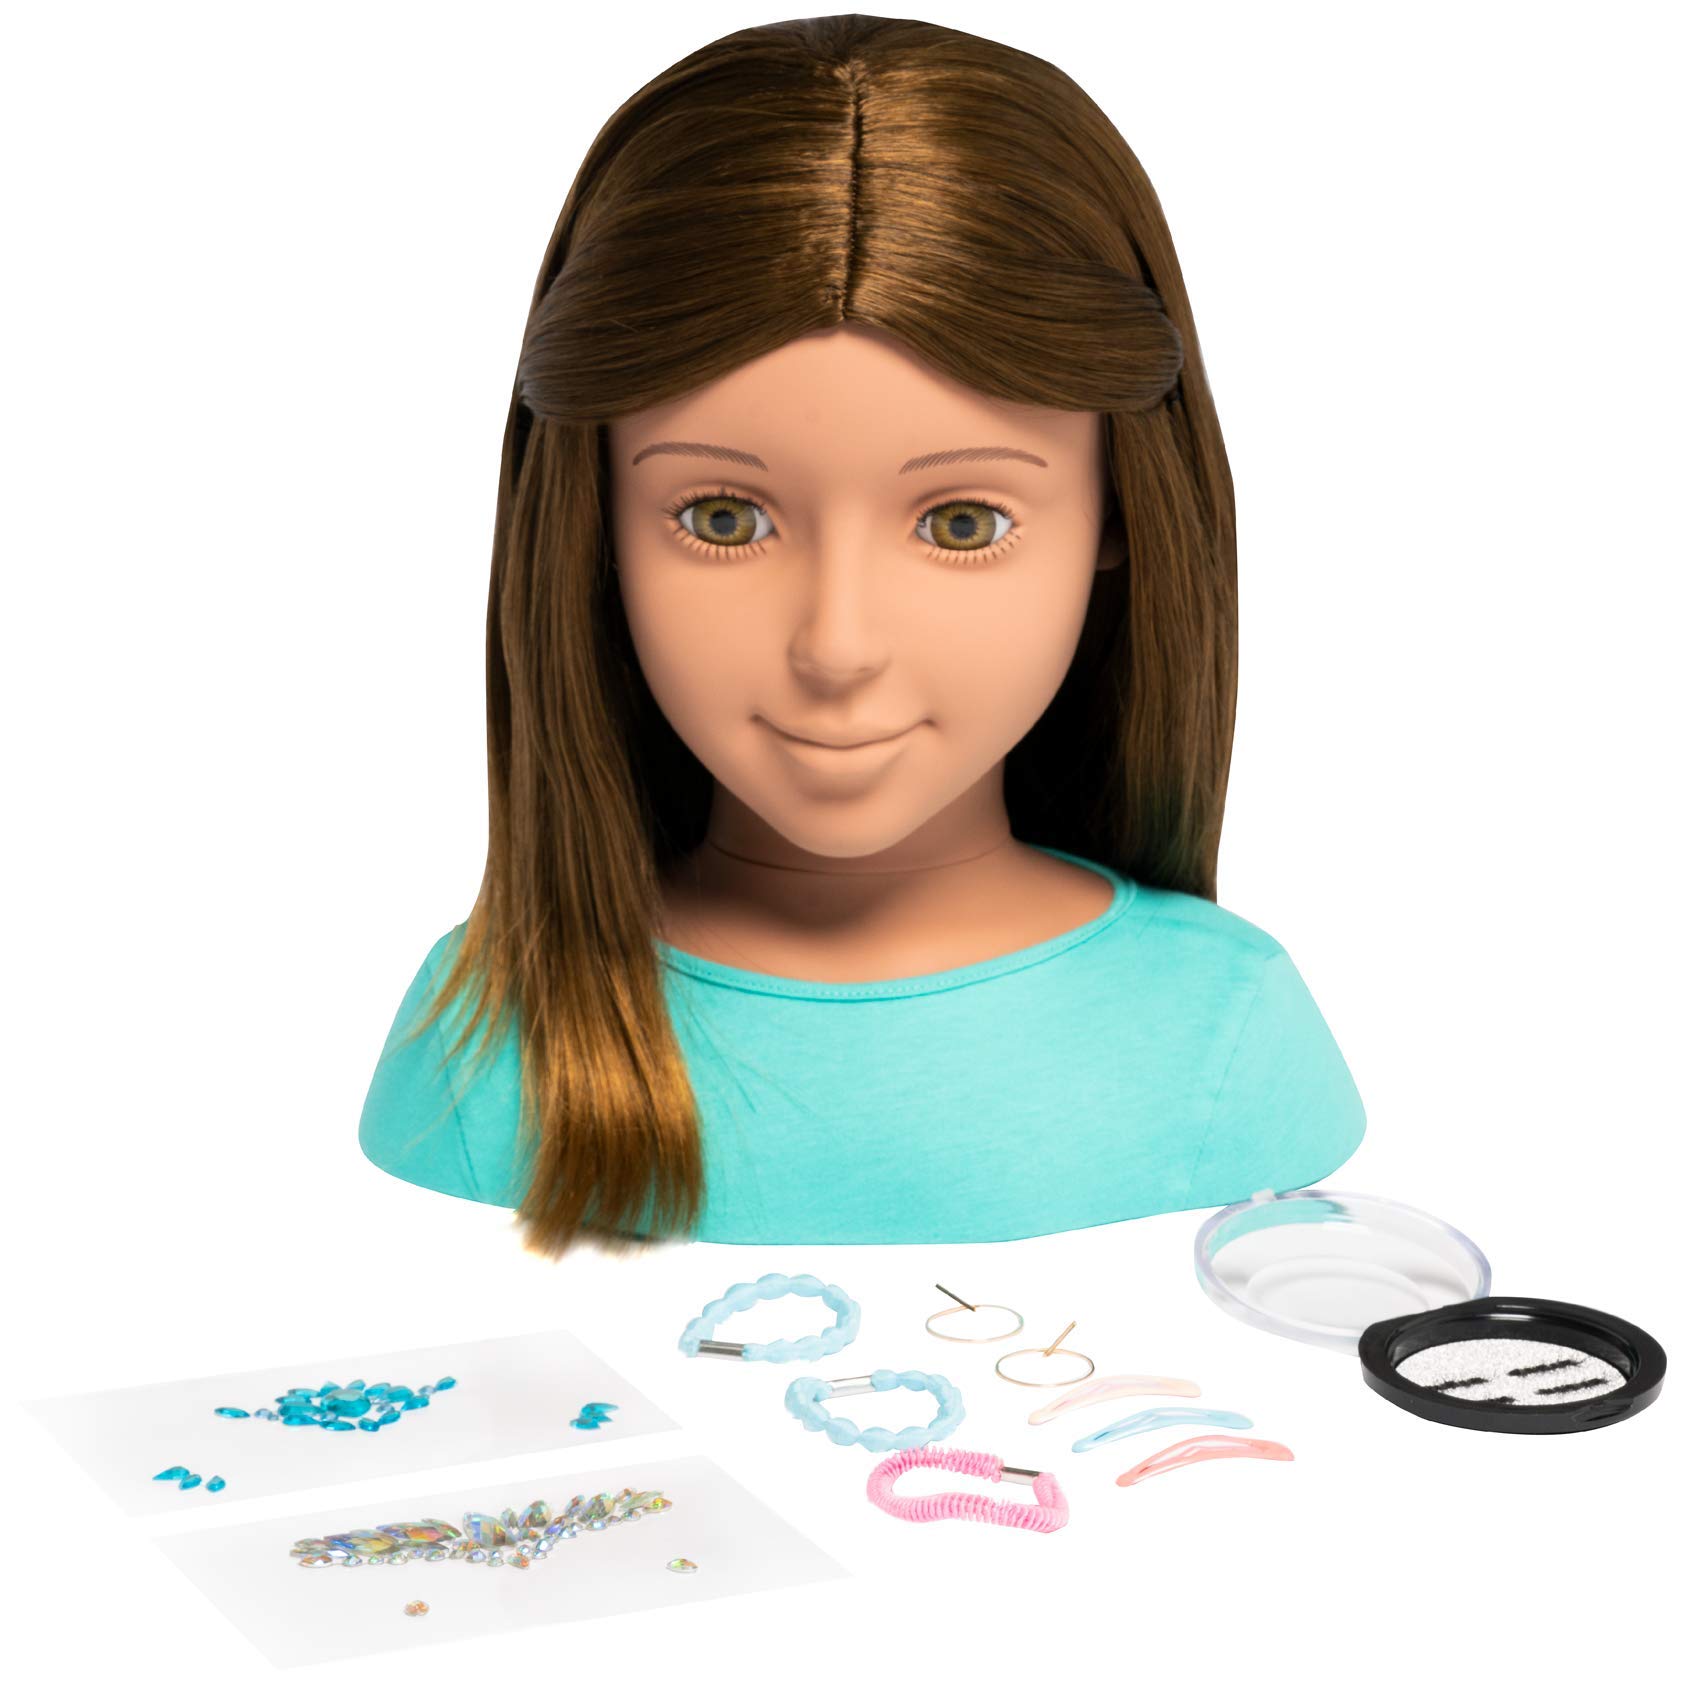 I'm A Stylist Styling Head Deluxe Lucy - Doll Mannequin Head, Interchangeable Wig, Synthetic Fiber Brown Hair Includes Magnetic Lashes, Hair Accessories, Earrings & Face Gems for Kids 8+ Years - 13